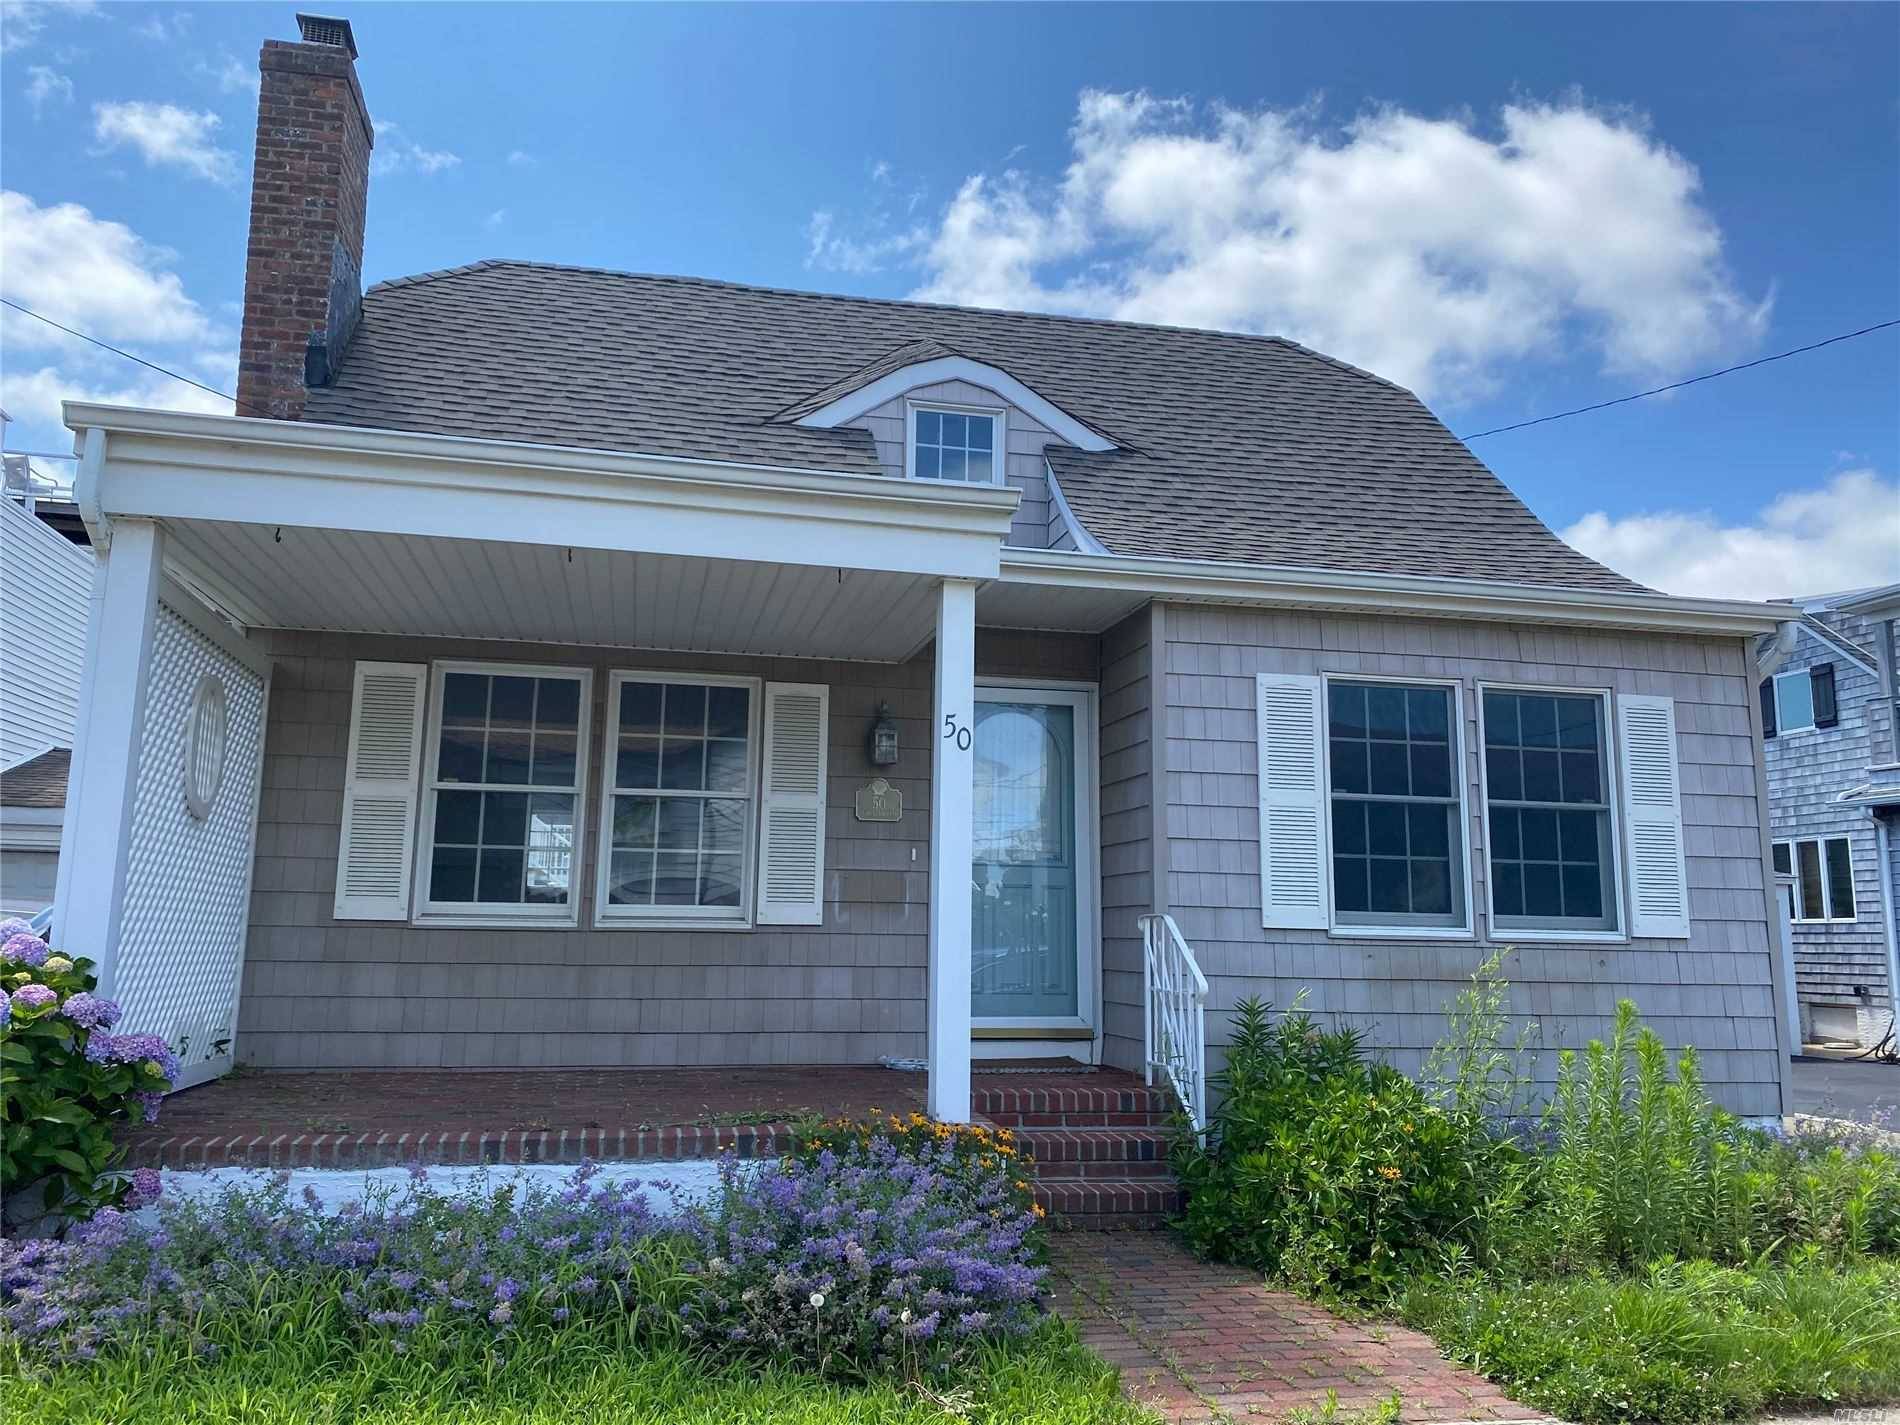 BEAUTIFULLY REDONE NATUCKET BEACH HOUSE OFFERING LVR WITH FIREPLACE, EIK STAINLESS STEAL APPLIANCES WOOD FLOORS THOUGHT WASHER amp ; DRYER, CAC, MASTER BEDROOM WITH FULL BATH ON MAIN FLOOR 2 ...